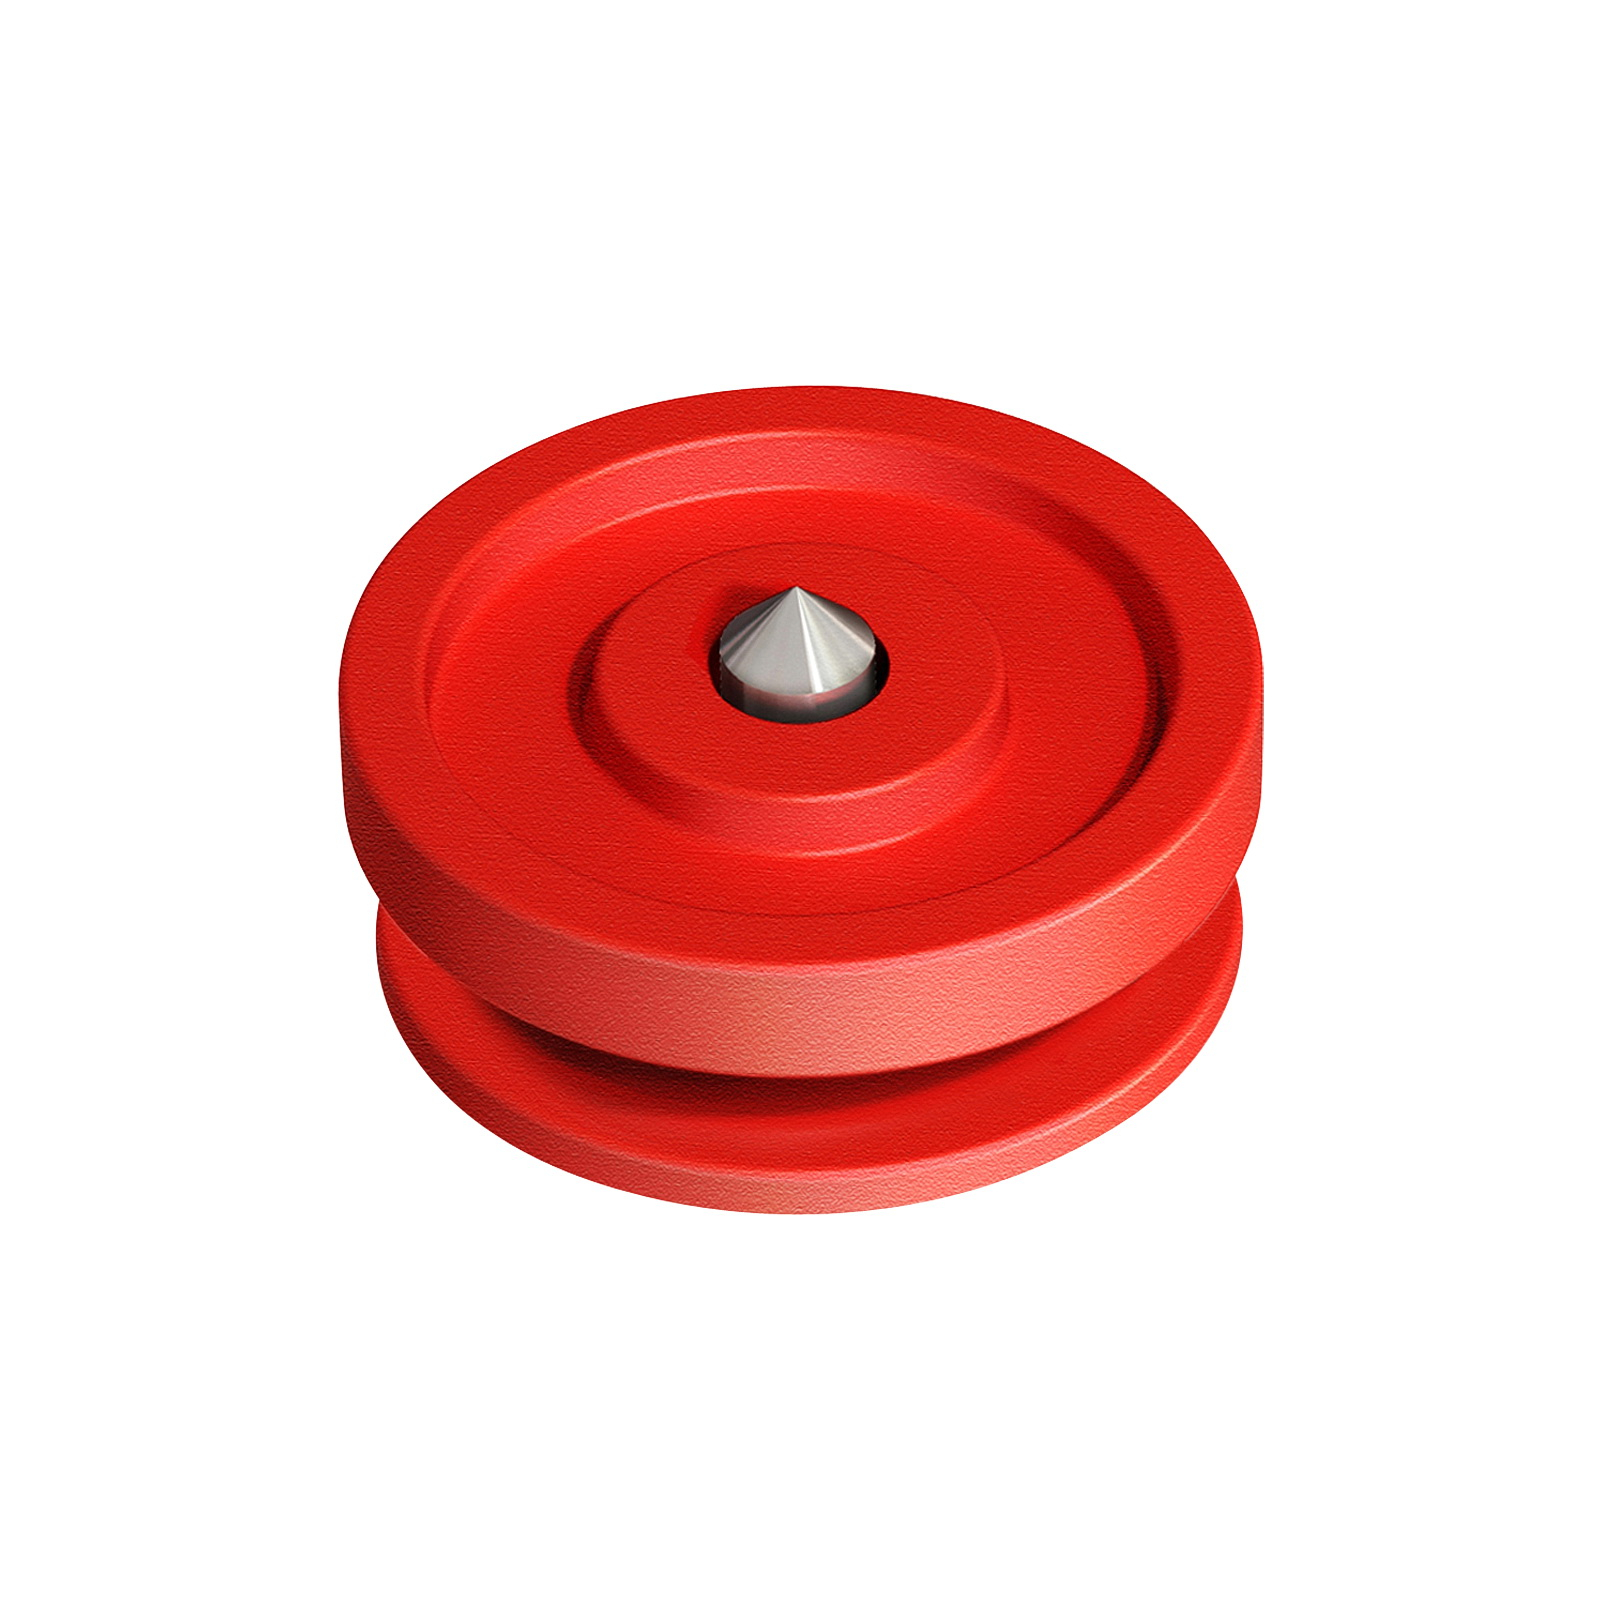 Button marker tool 